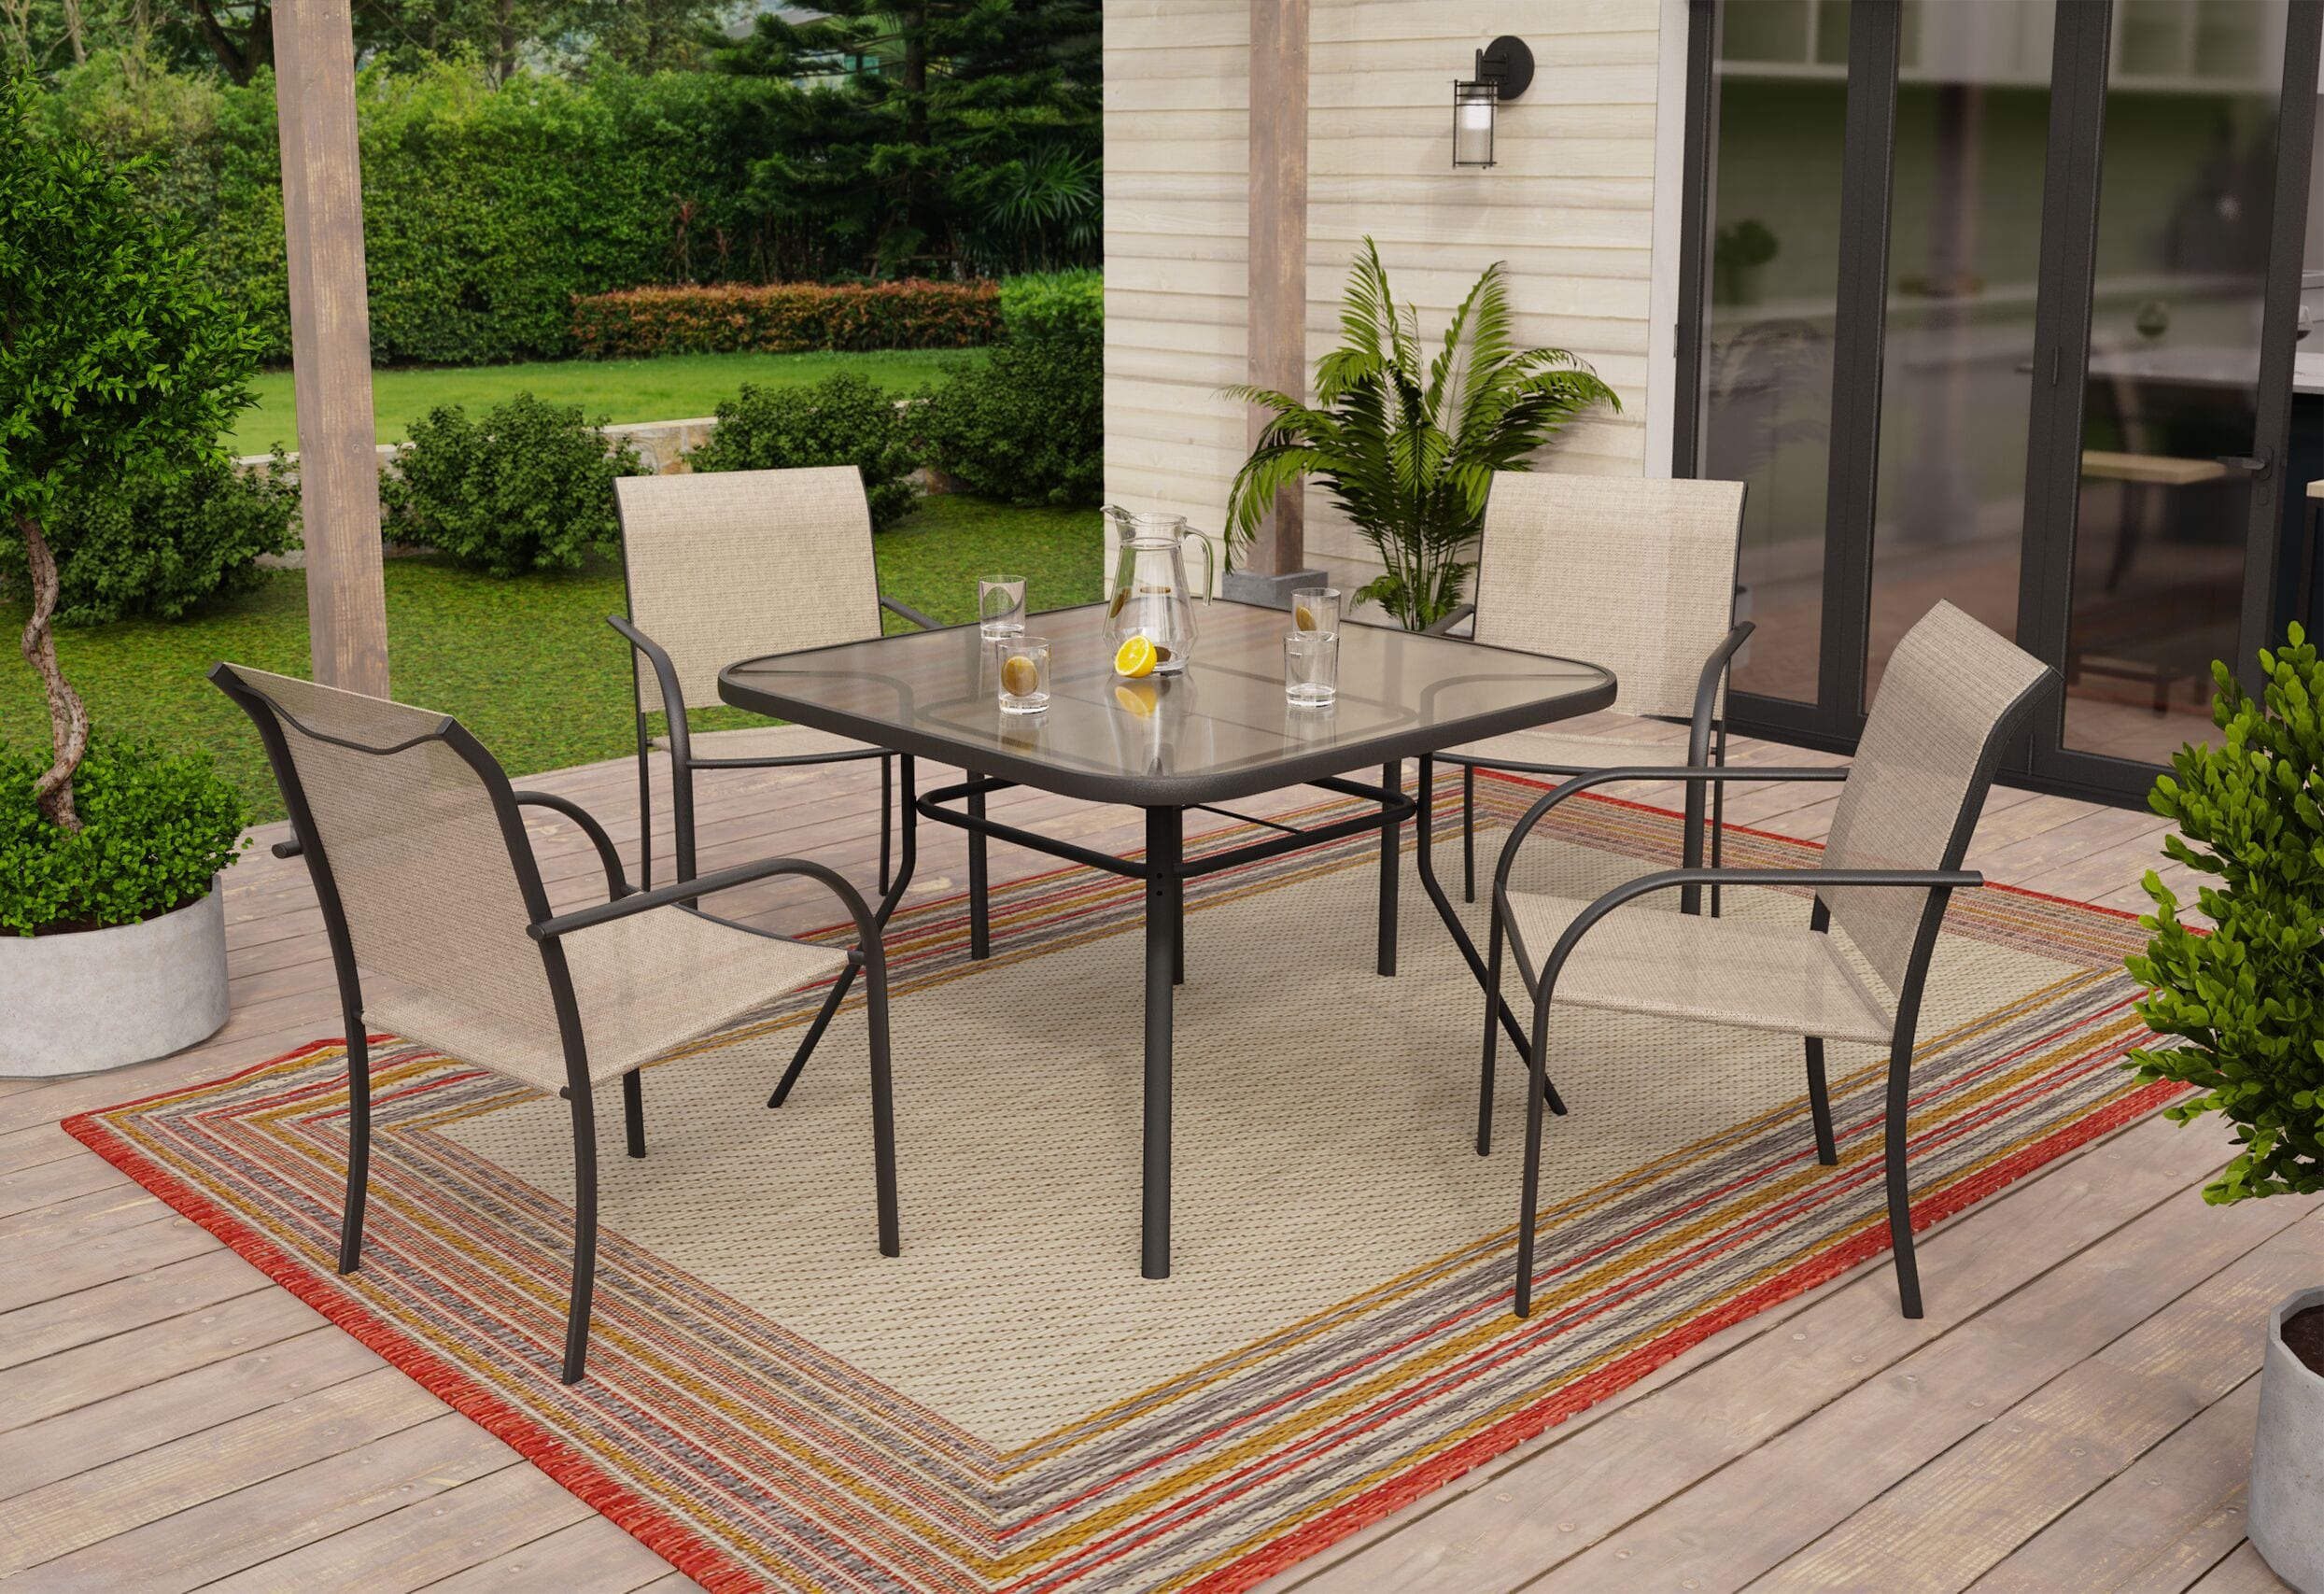 Style Selections Pelham Bay Square Outdoor Dining Table 42-in W x 42-in L  with Umbrella Hole